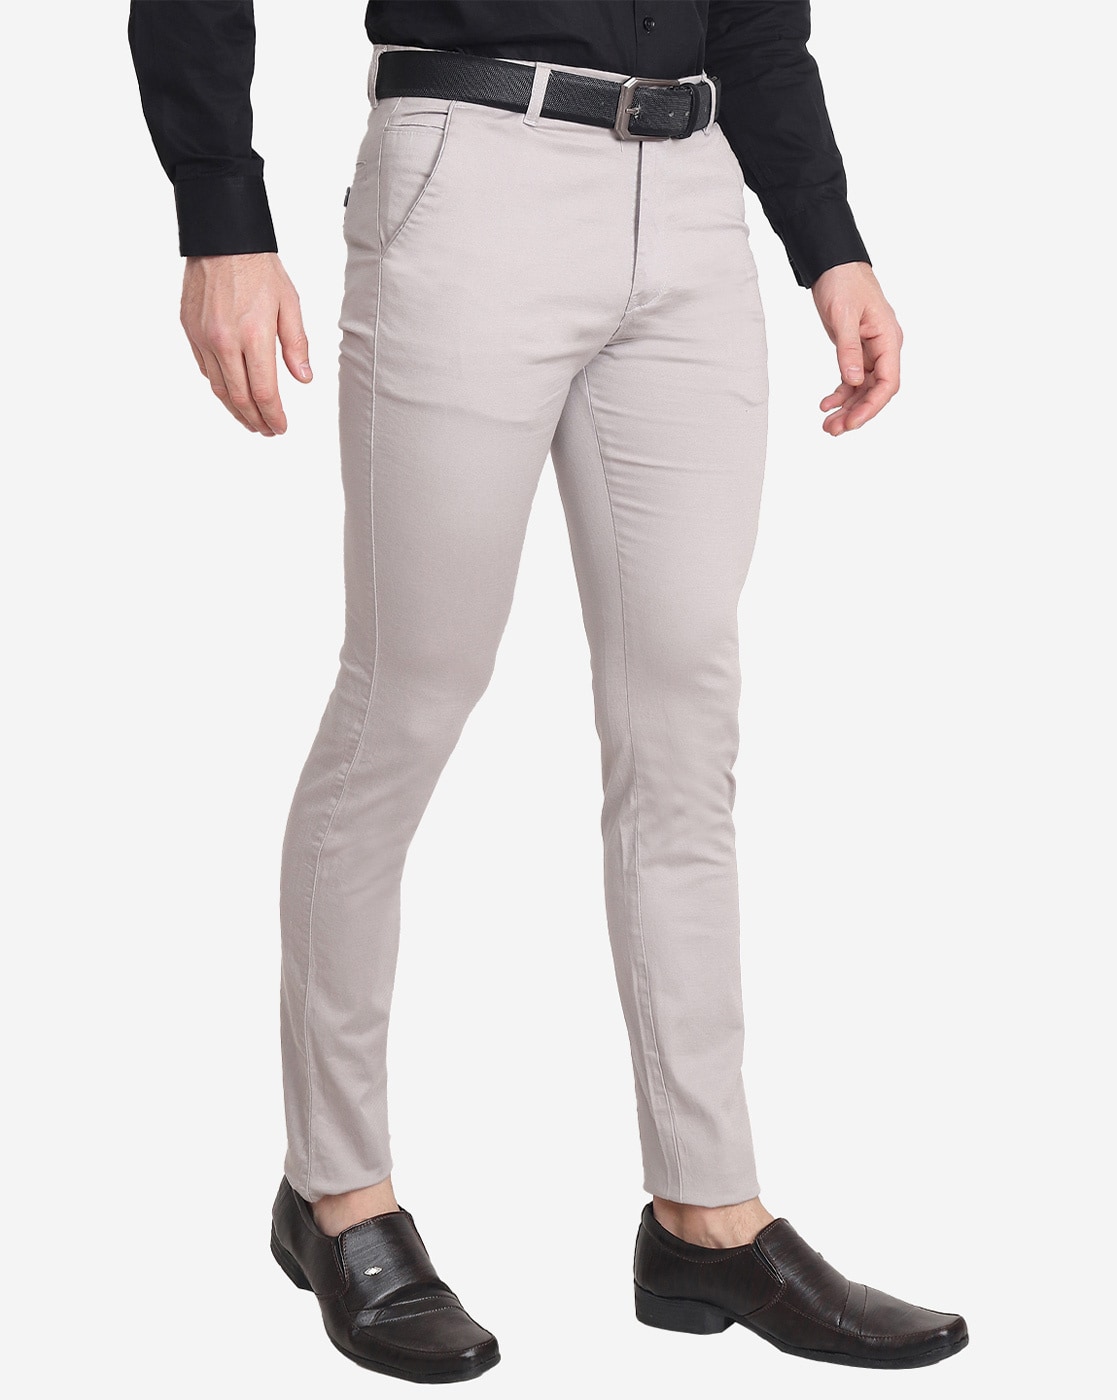 Buy VDOT Textured Cotton Blend Regular Fit Mens Trousers  Shoppers Stop